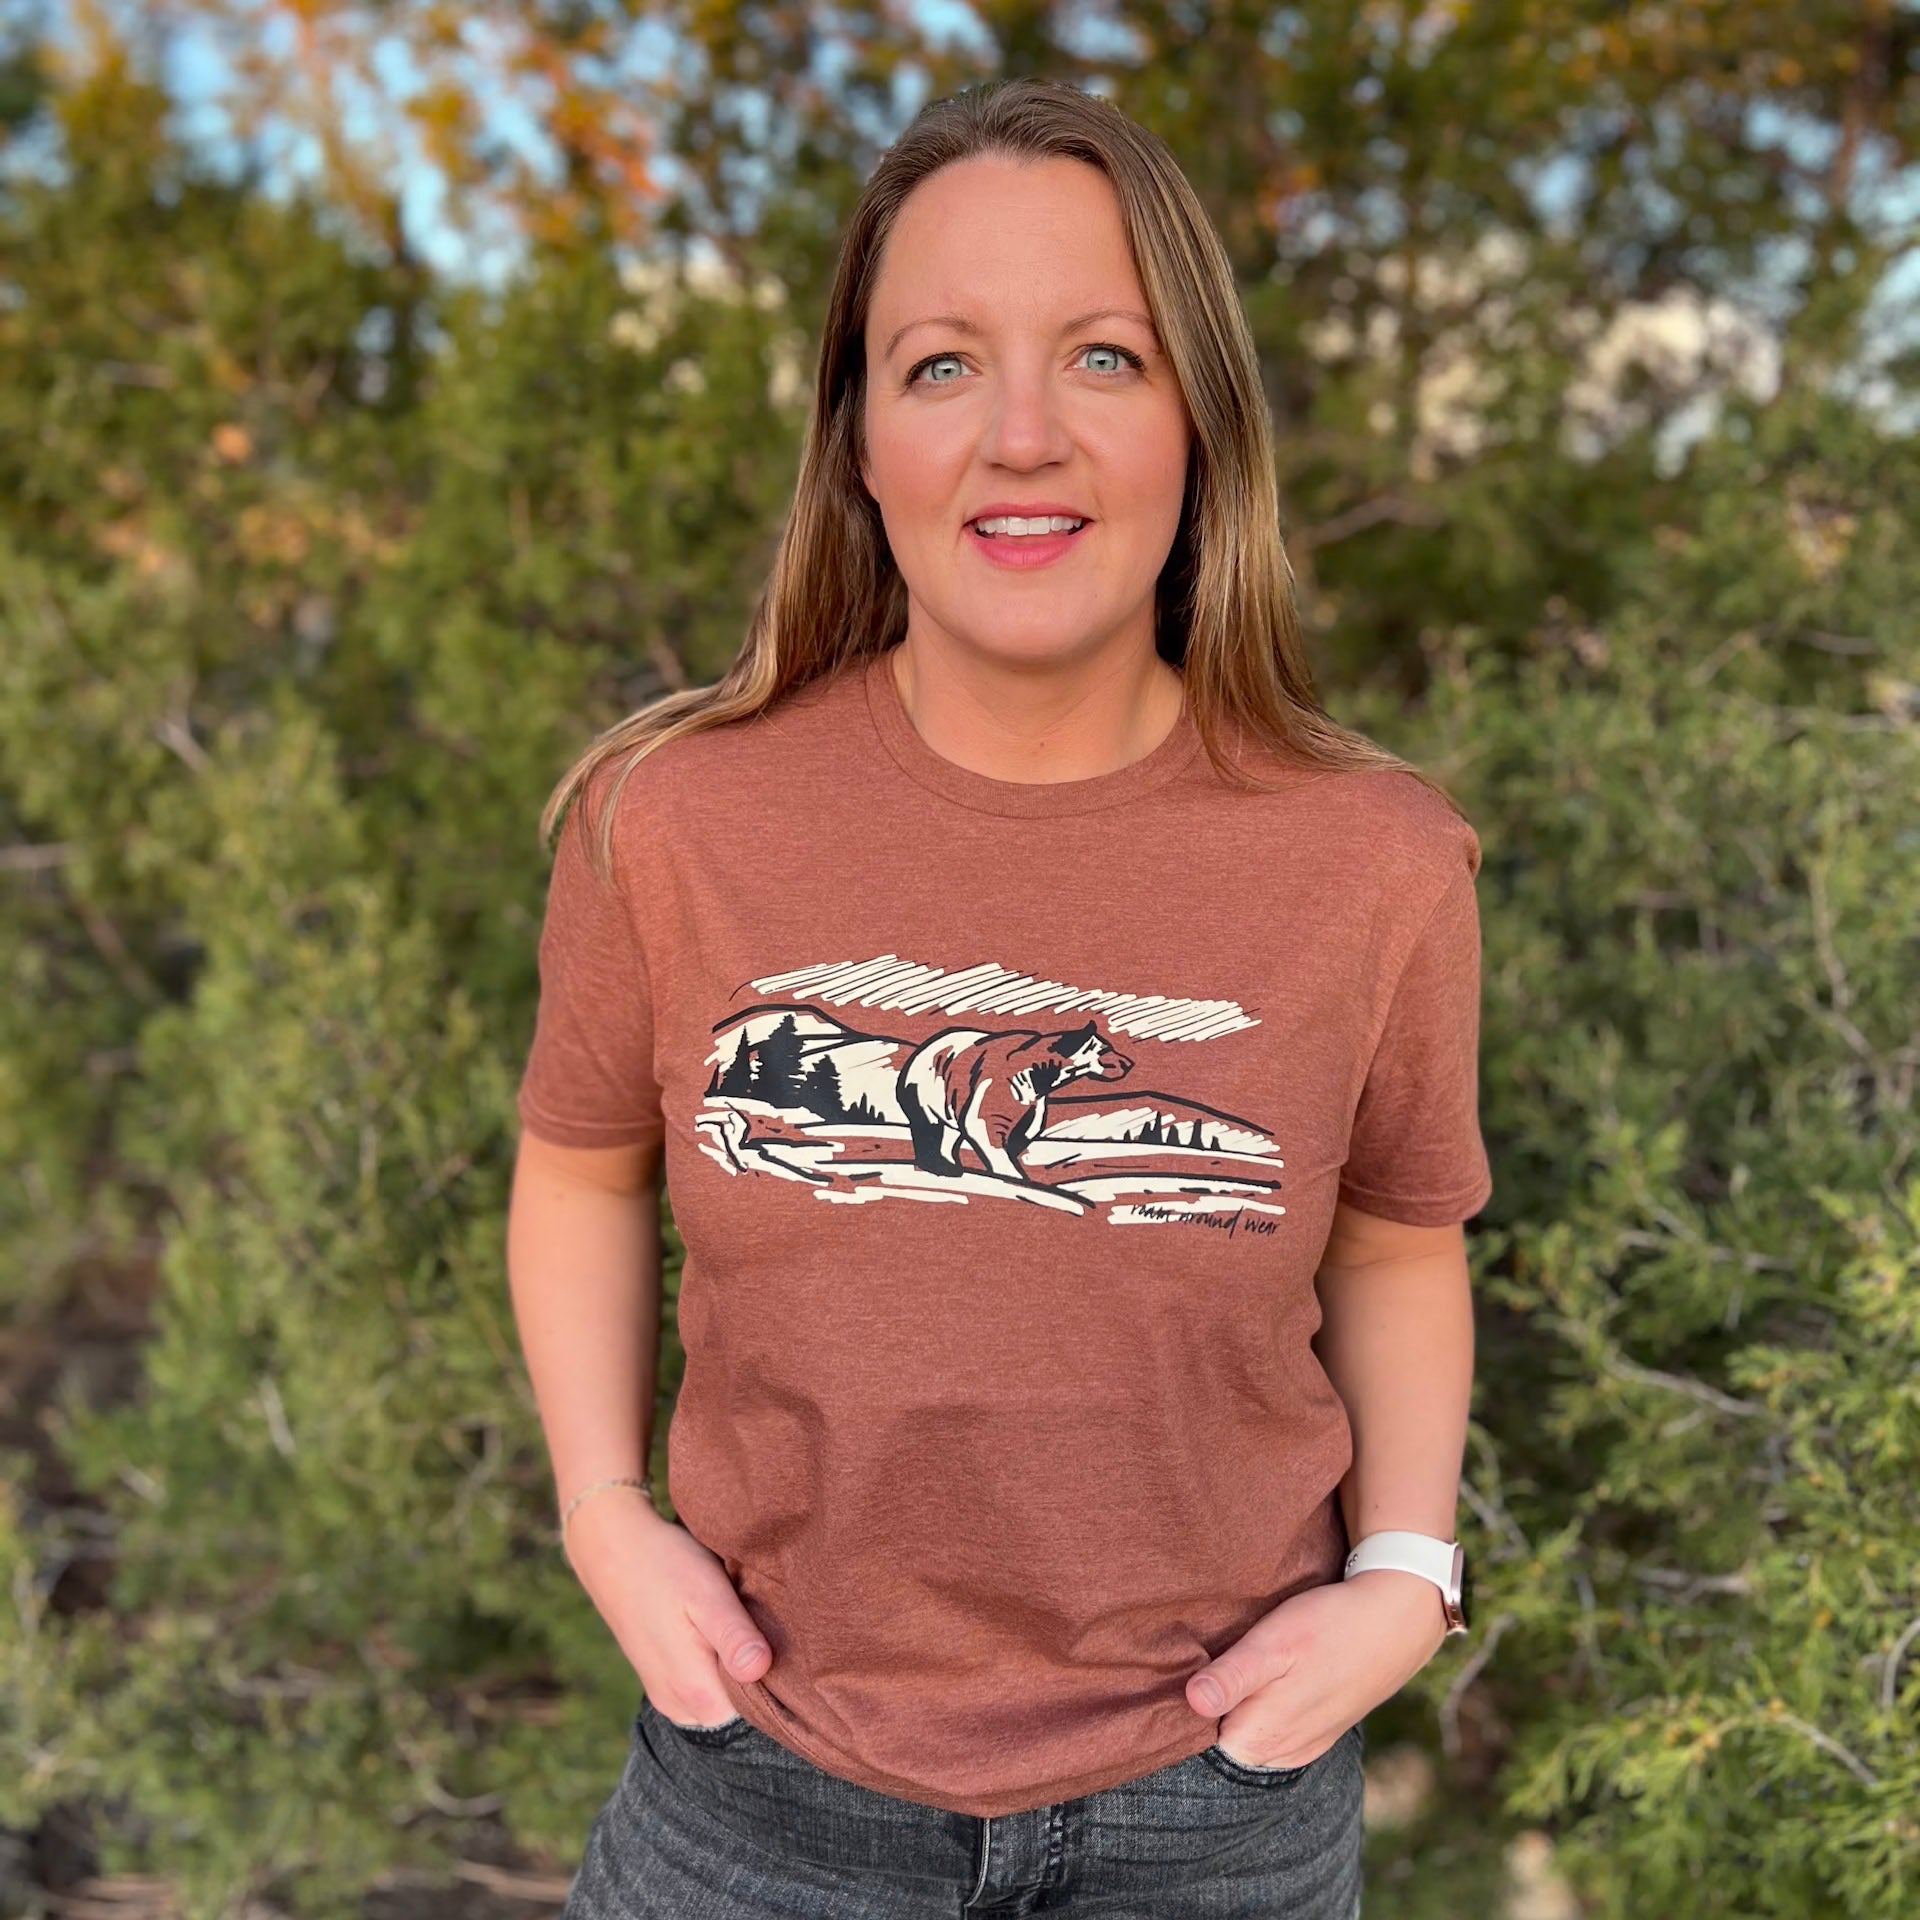 Bear tee shirt. Outdoor bear shirt. Wyoming t-shirt. Unisex shirt. Roam Around Wear is a Wyoming t-shirt company based out of Gillette, Wyoming